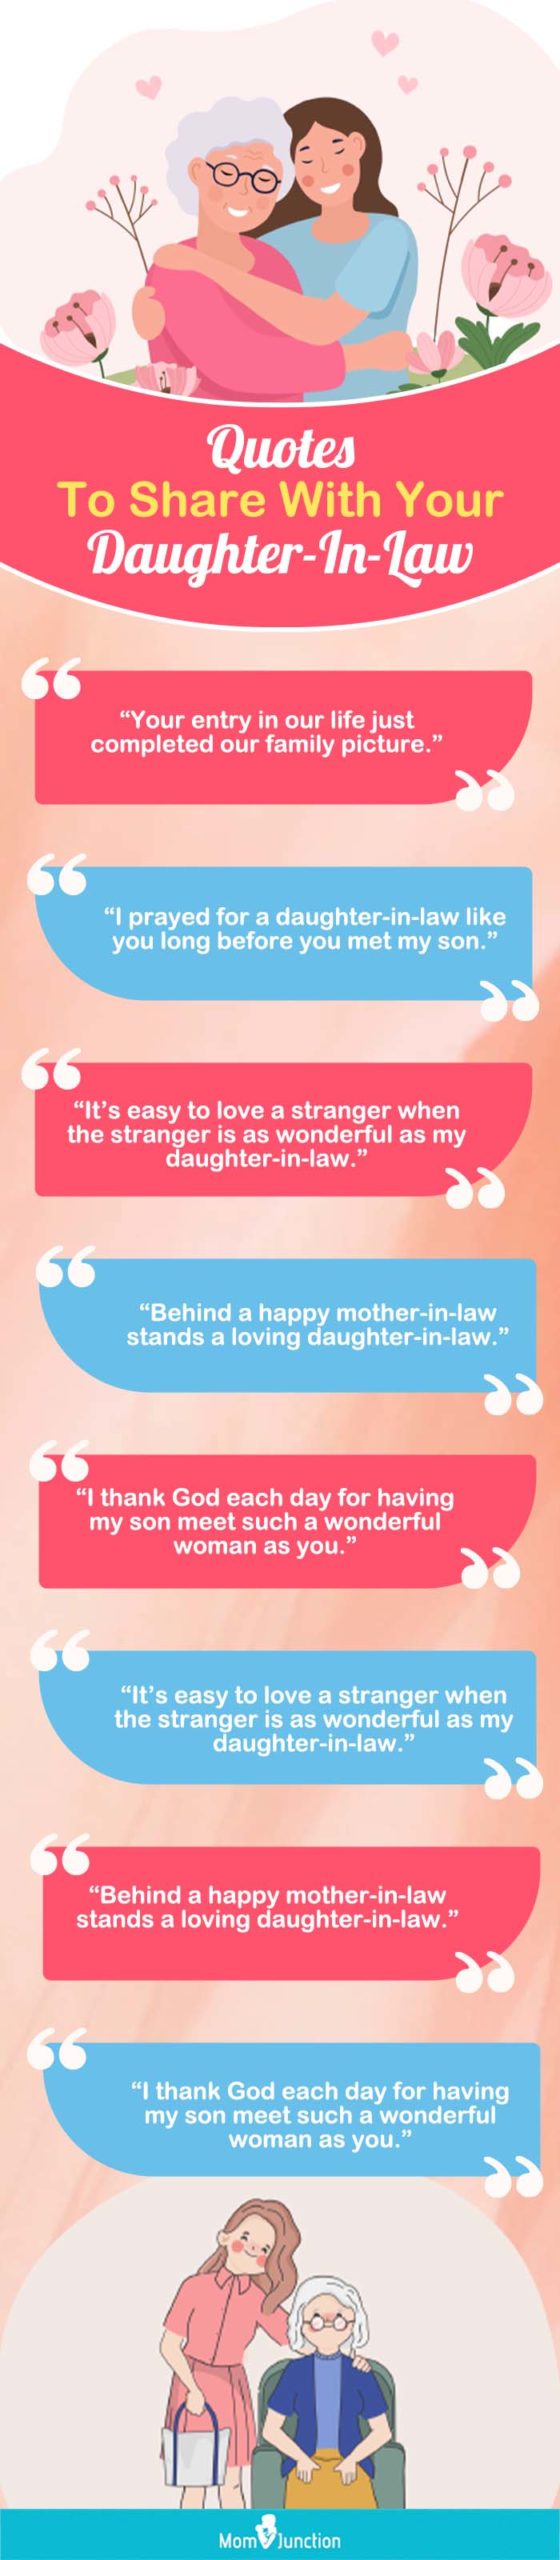 mothers day quotes from daughter in law